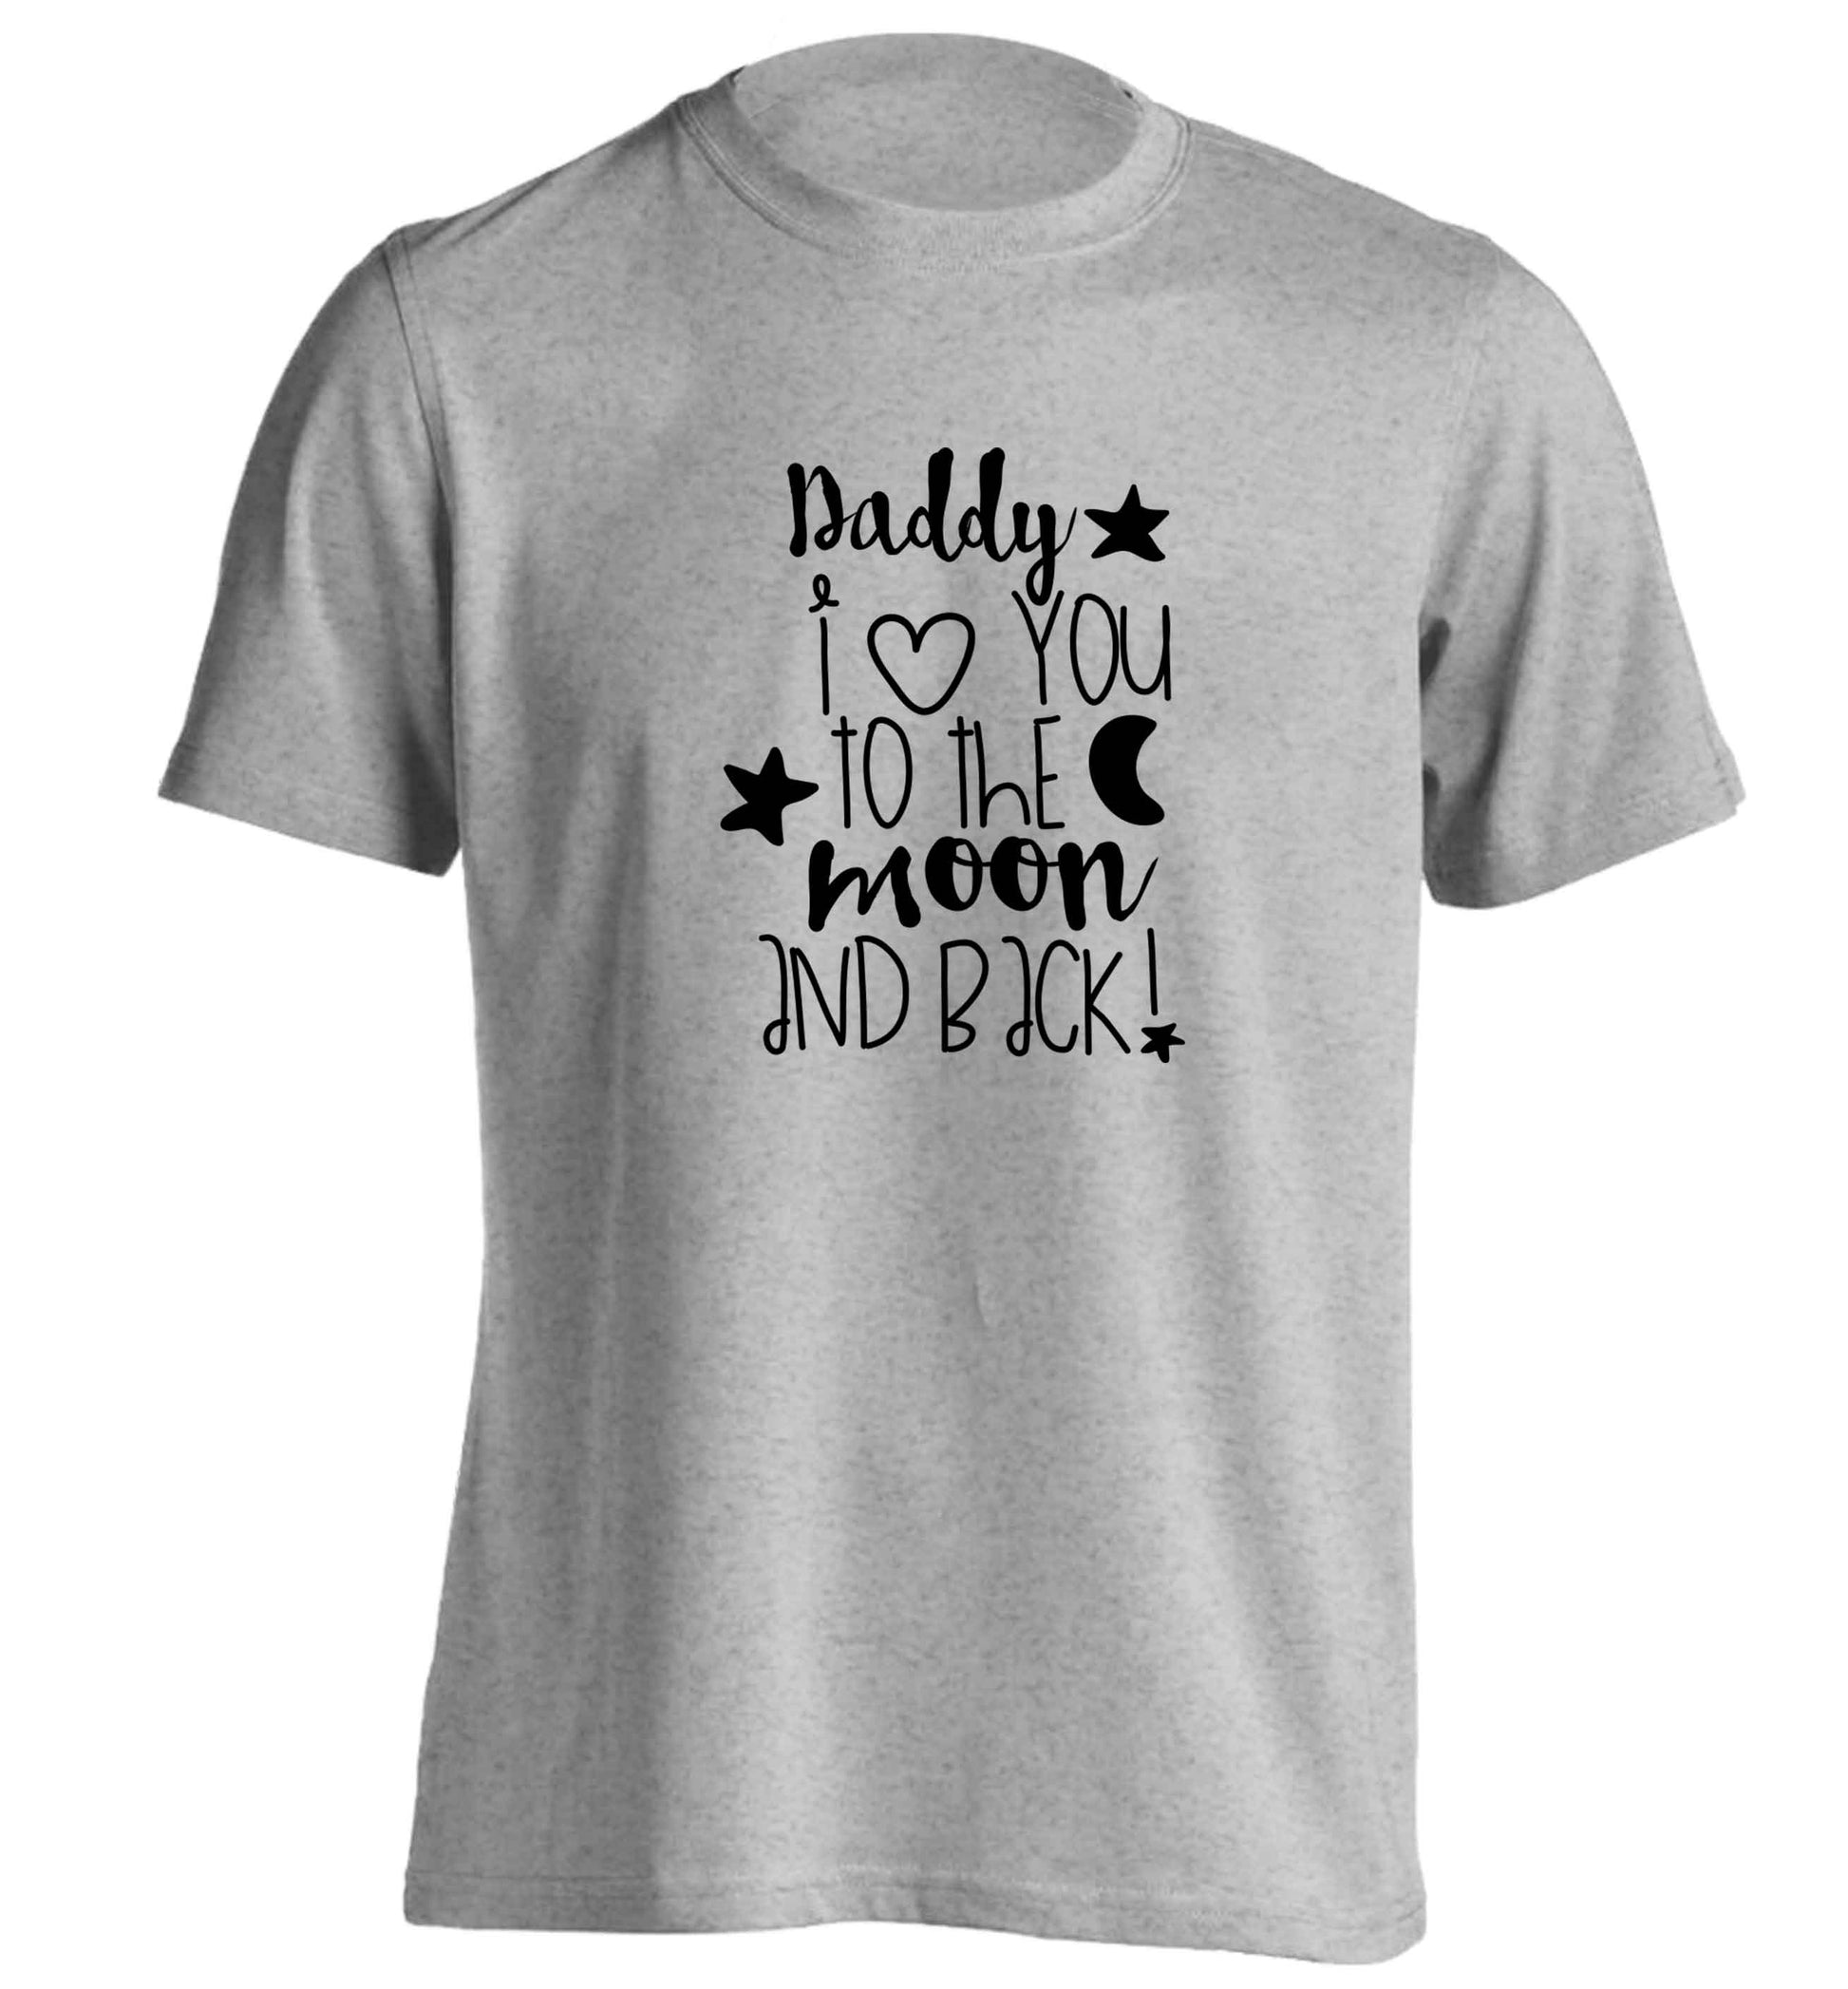 Daddy I love you to the moon and back adults unisex grey Tshirt 2XL